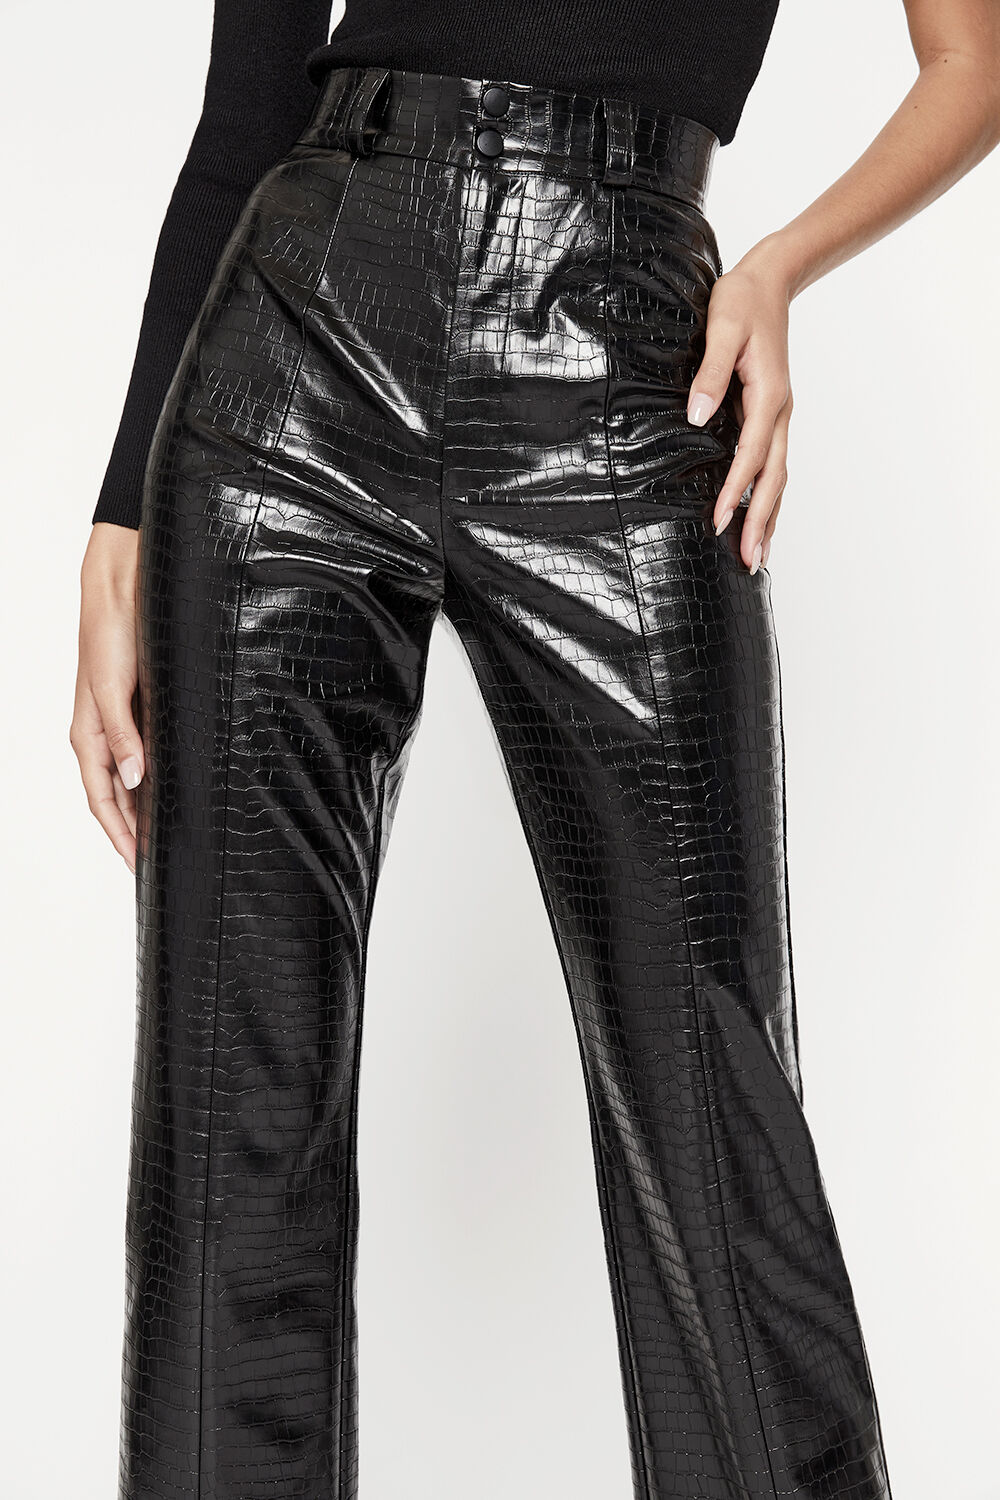 These Attico croc-effect leather pants are better than jeans!